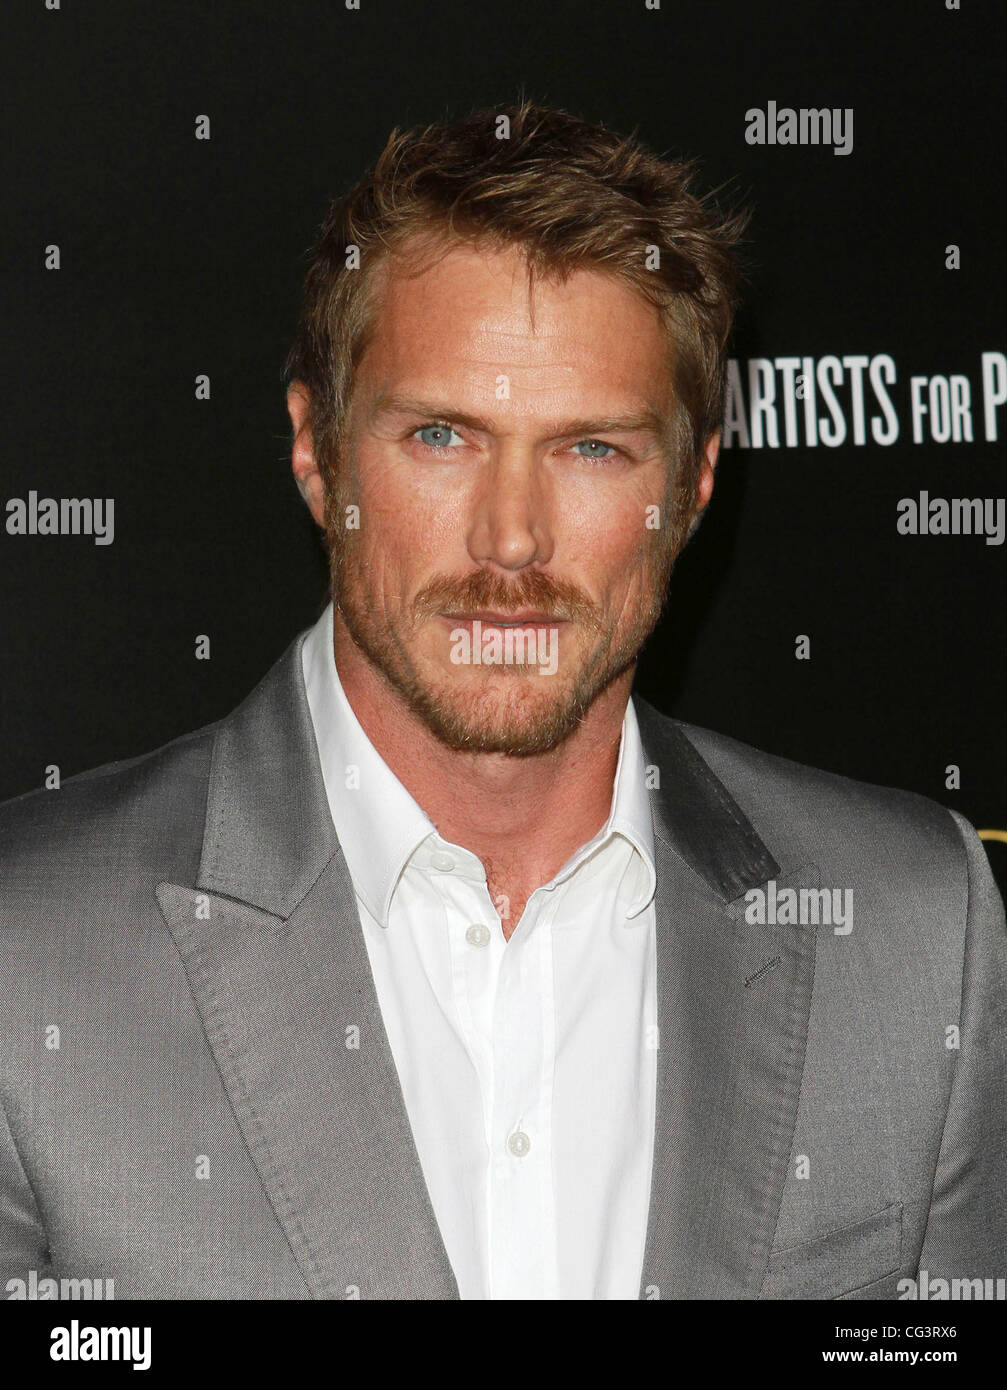 Jason Lewis Bvlgari private event honoring Simon Fuller and Paul Haggis to benefit Save The Children and Artists For Peace and Justice - Red Carpet Arrivals Beverly Hills, California - 13.01.11 Stock Photo